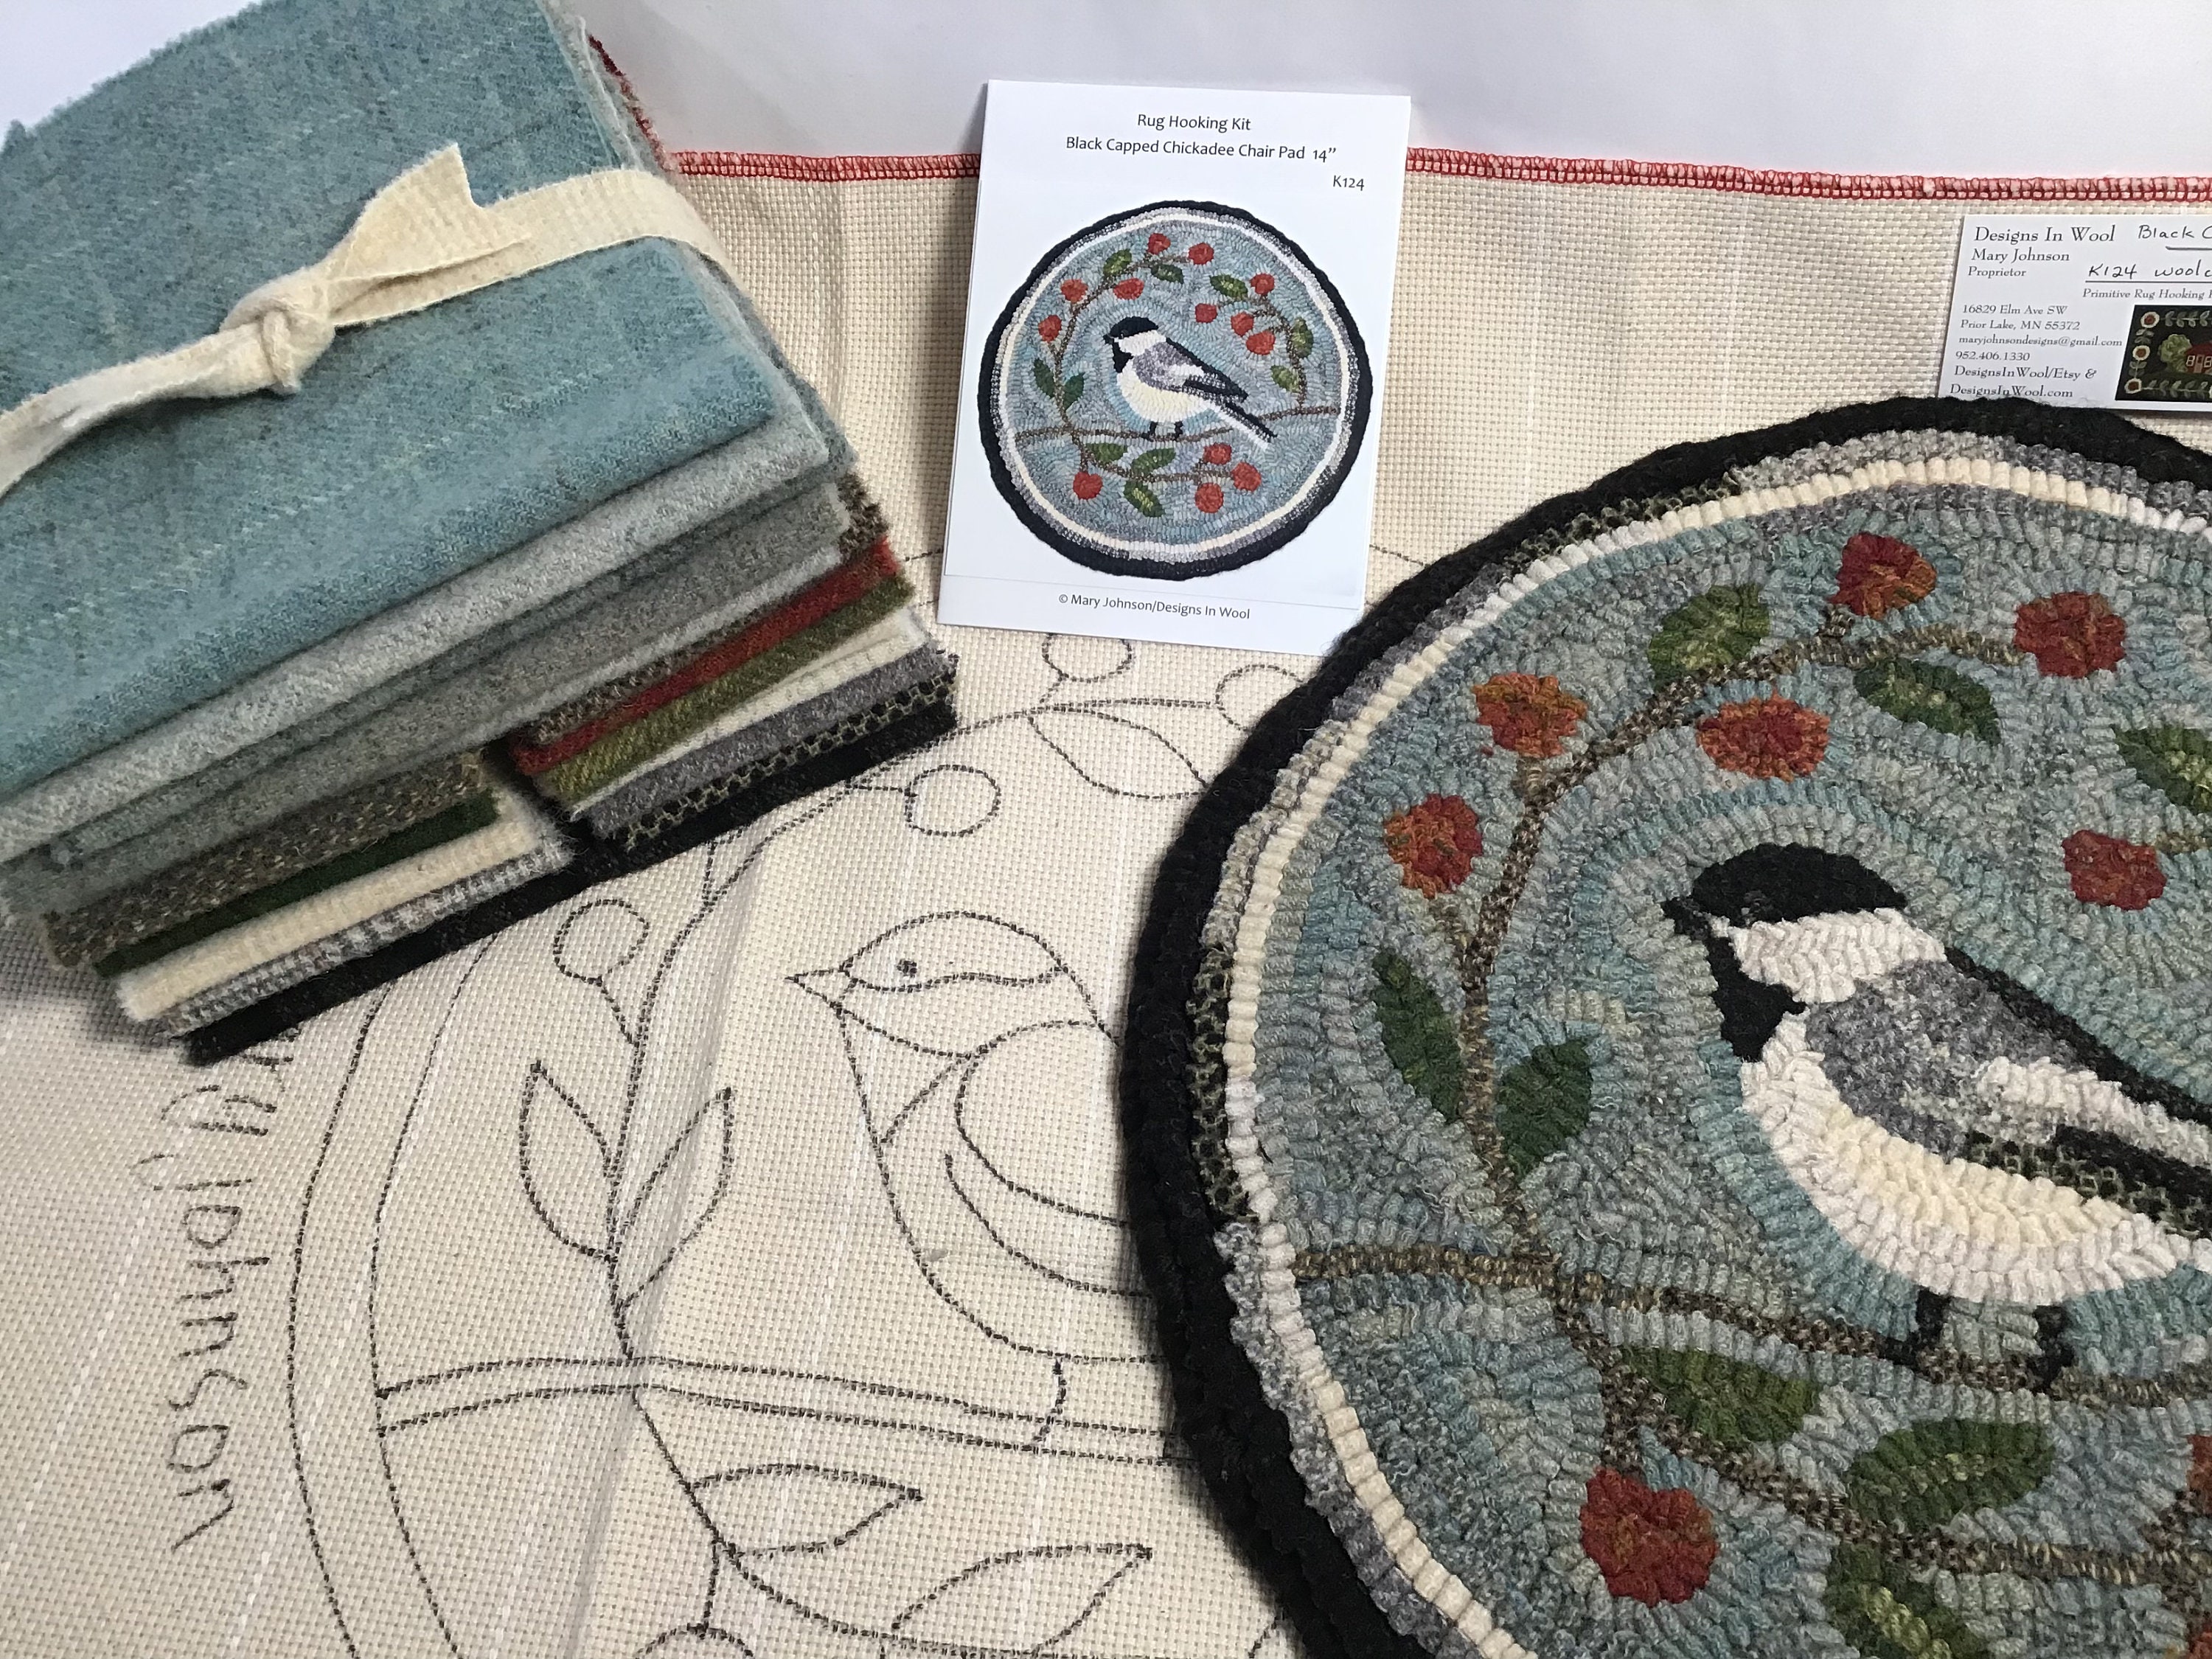 Rug Hooking KIT, Black Capped Chickadee Chair Pad or Table Mat